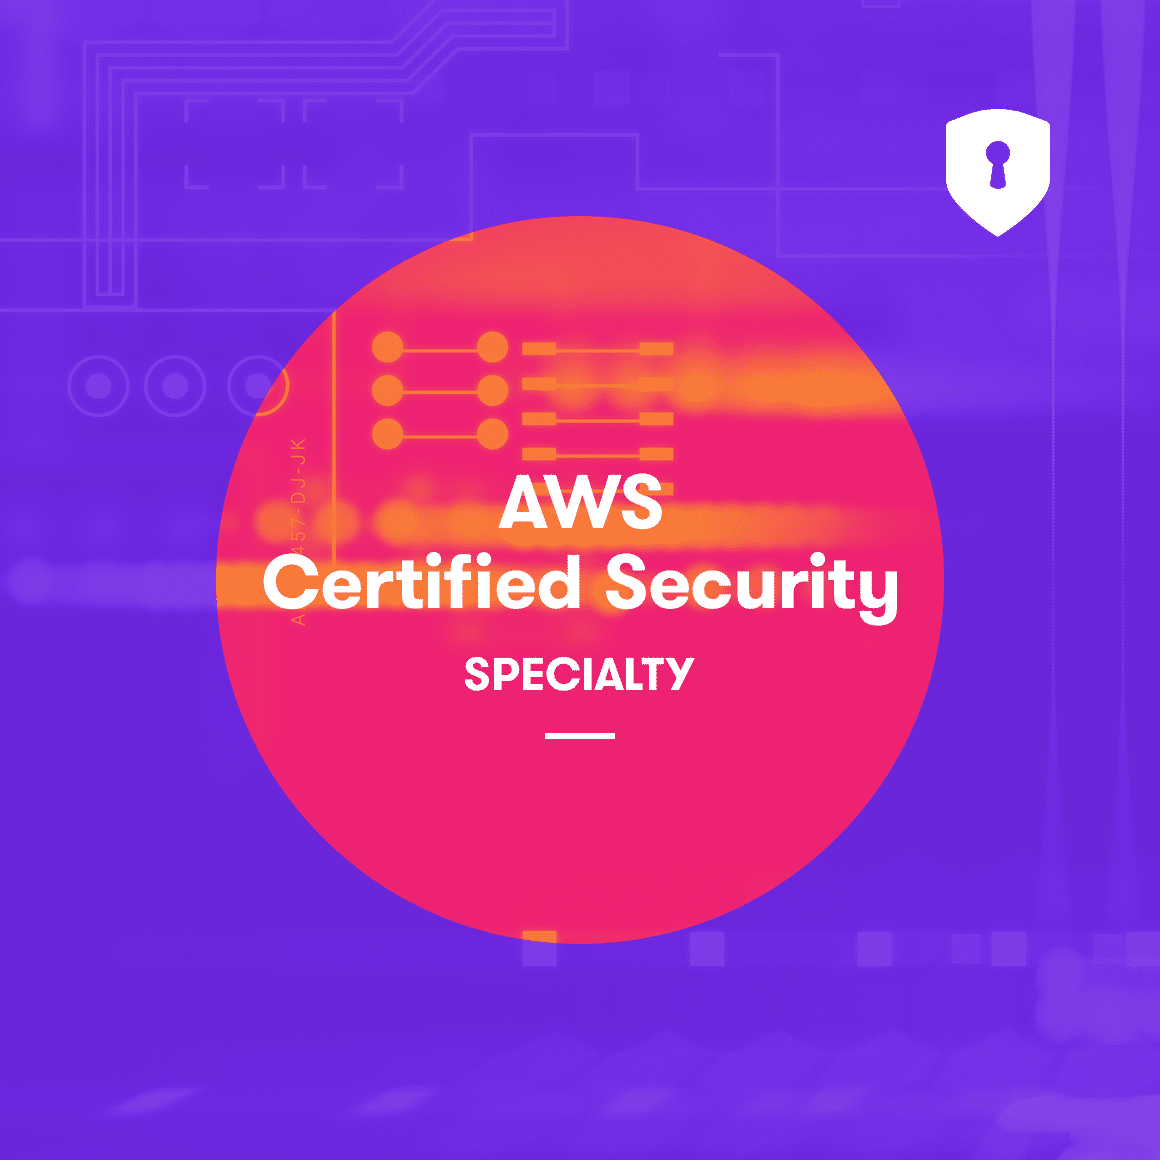 aws-certified-security-specialty-2-square-png.png